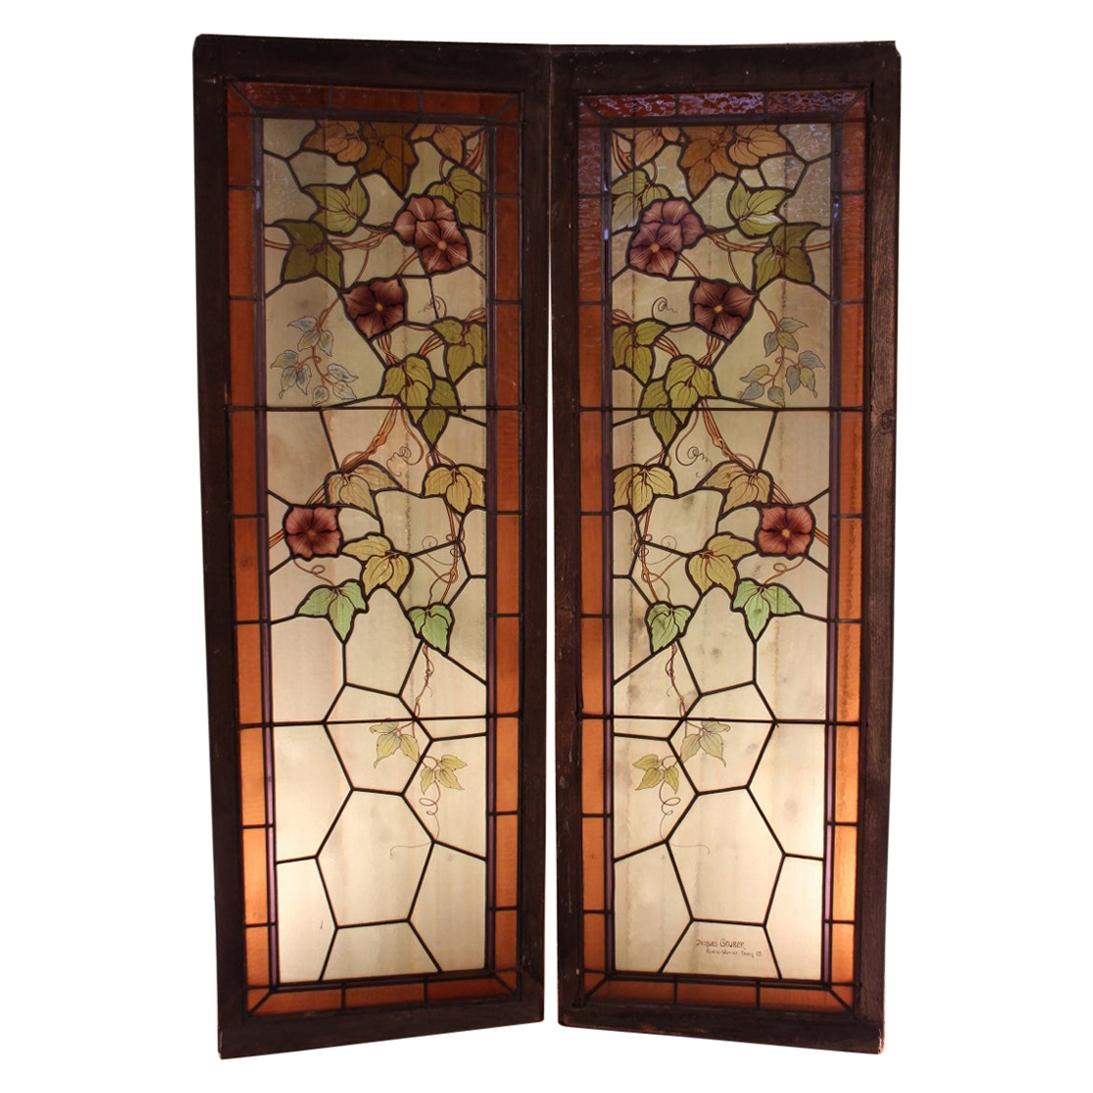 Pair of Art Nouveau Stained Glass Signed by Jacques Gruber